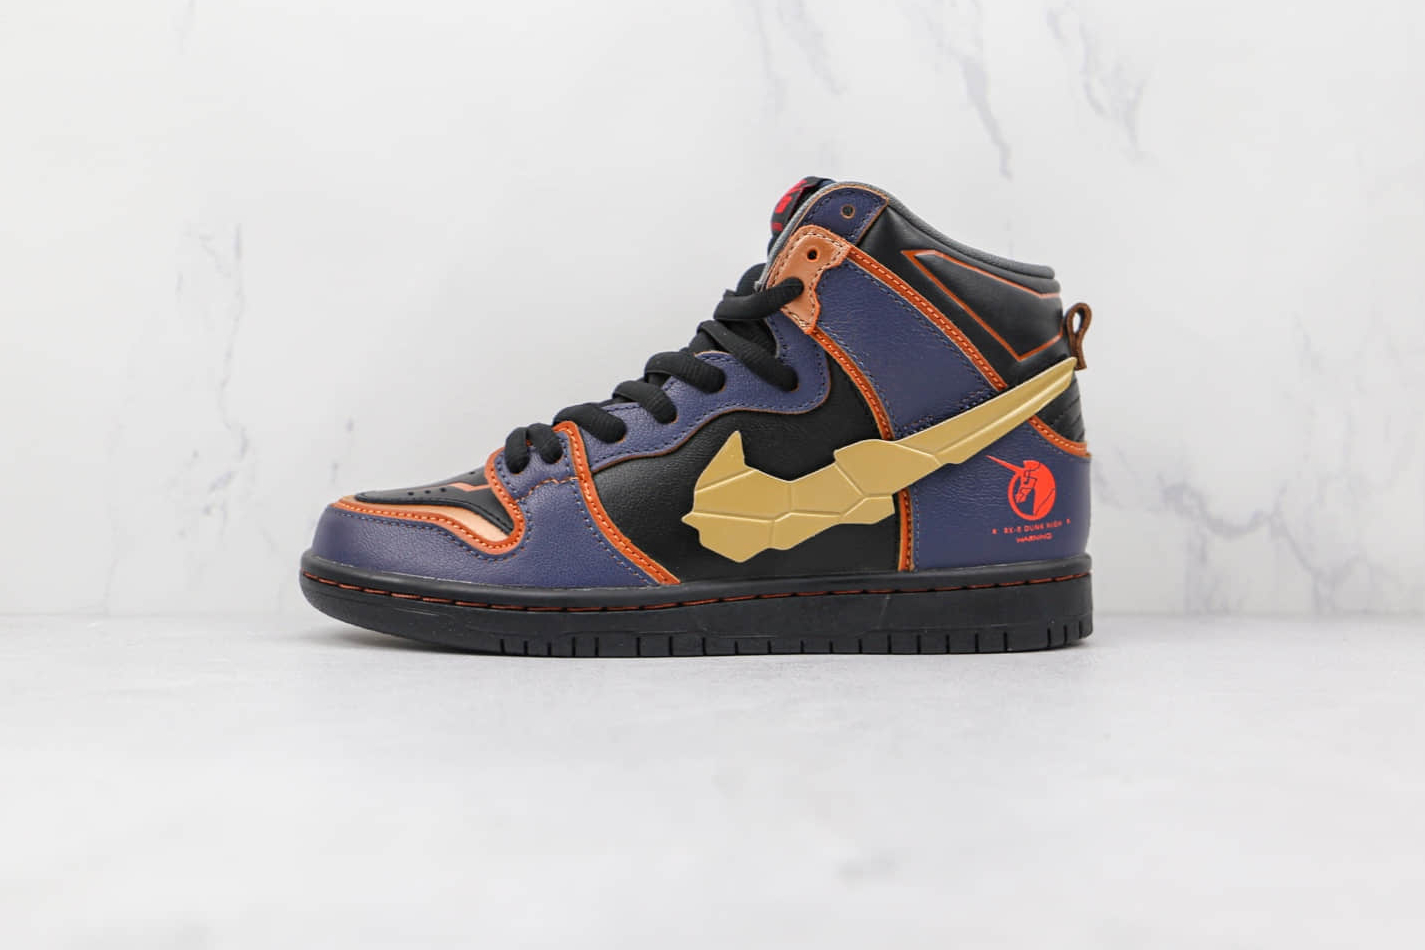 Nike Gundam x Dunk High SB 'Project Unicorn - Banshee Norn' DH7717-400 for the Ultimate Sneaker Collection